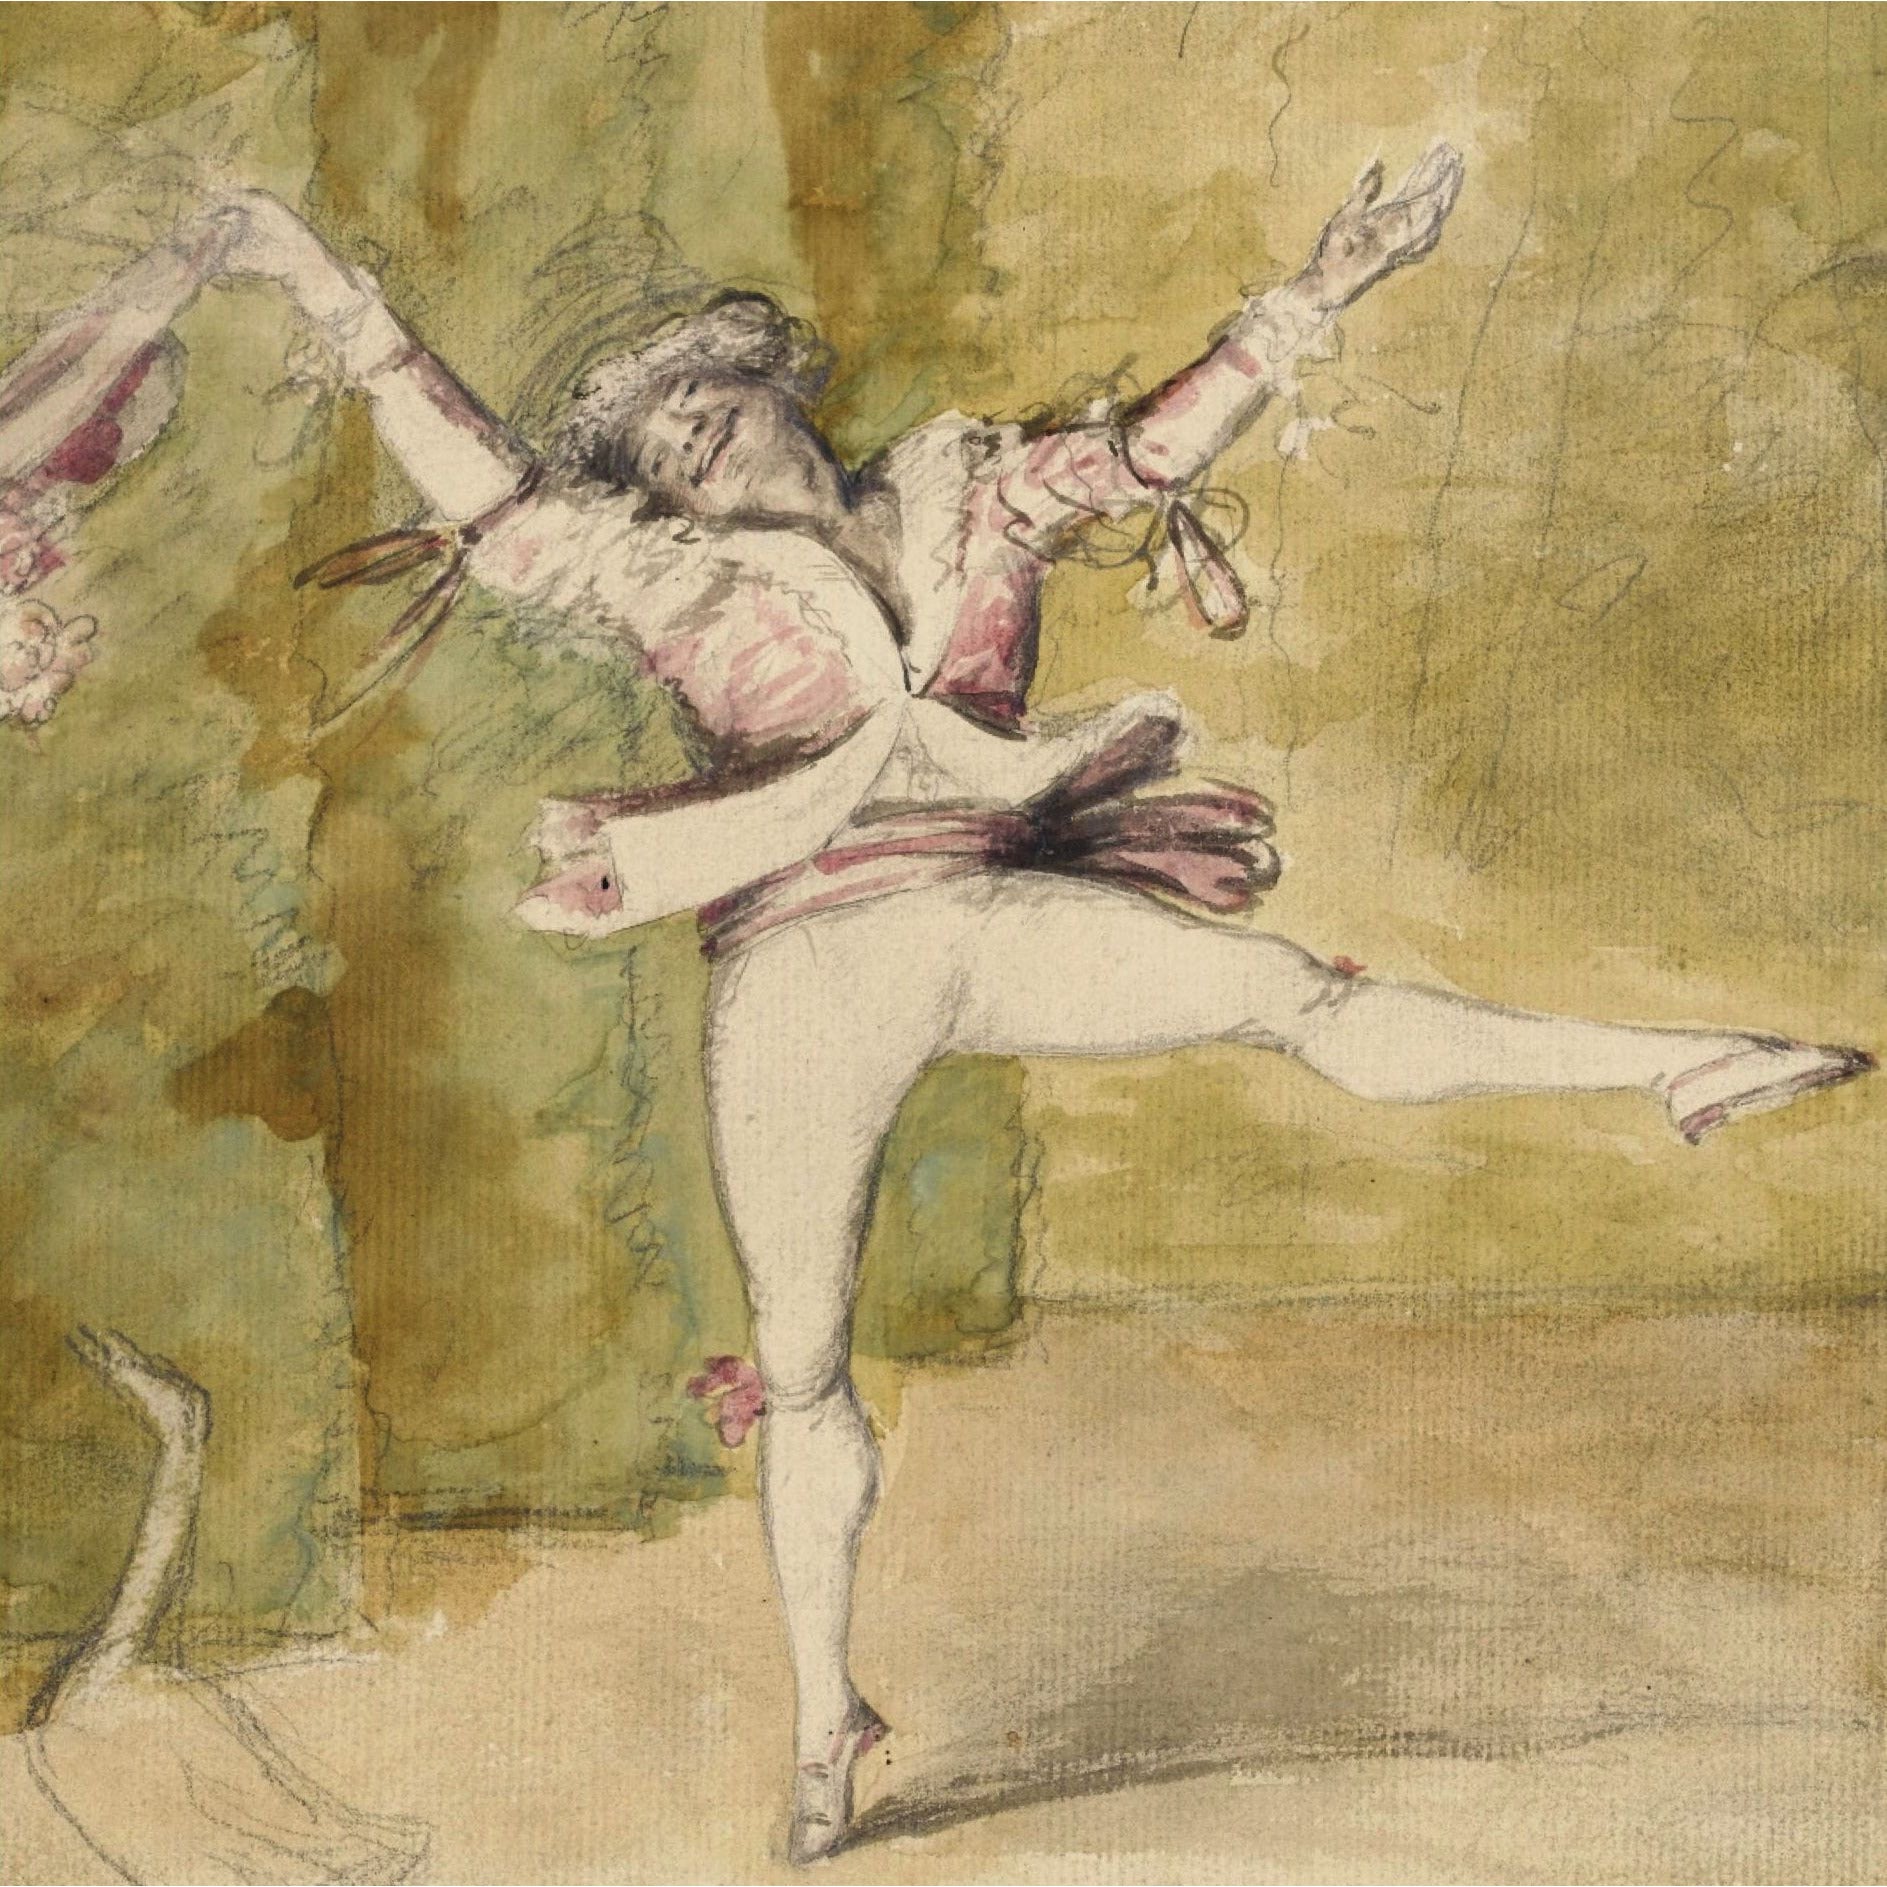 Square greeting card - caricature of French dancer Marie-Auguste Vestris, in coloured wash and graphite. The twirling dancer is accompanied by the sketch of a goose. From the collection of The Fitzwilliam Museum, brought to you by CuratingCambridge.com